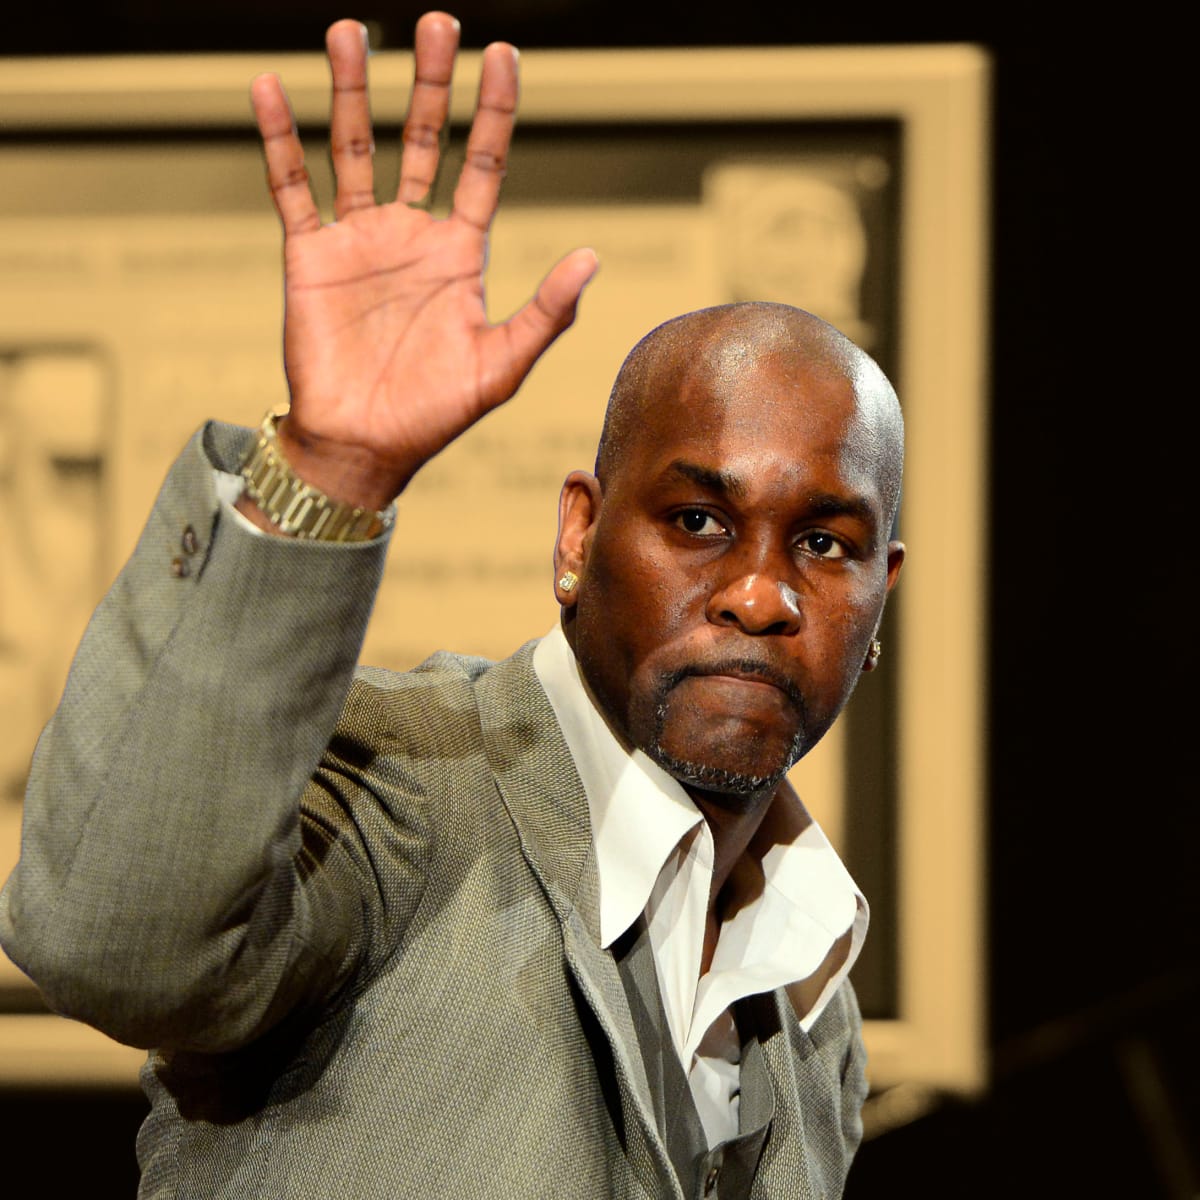 Gary Payton is still irked by his 2003 departure from Seattle